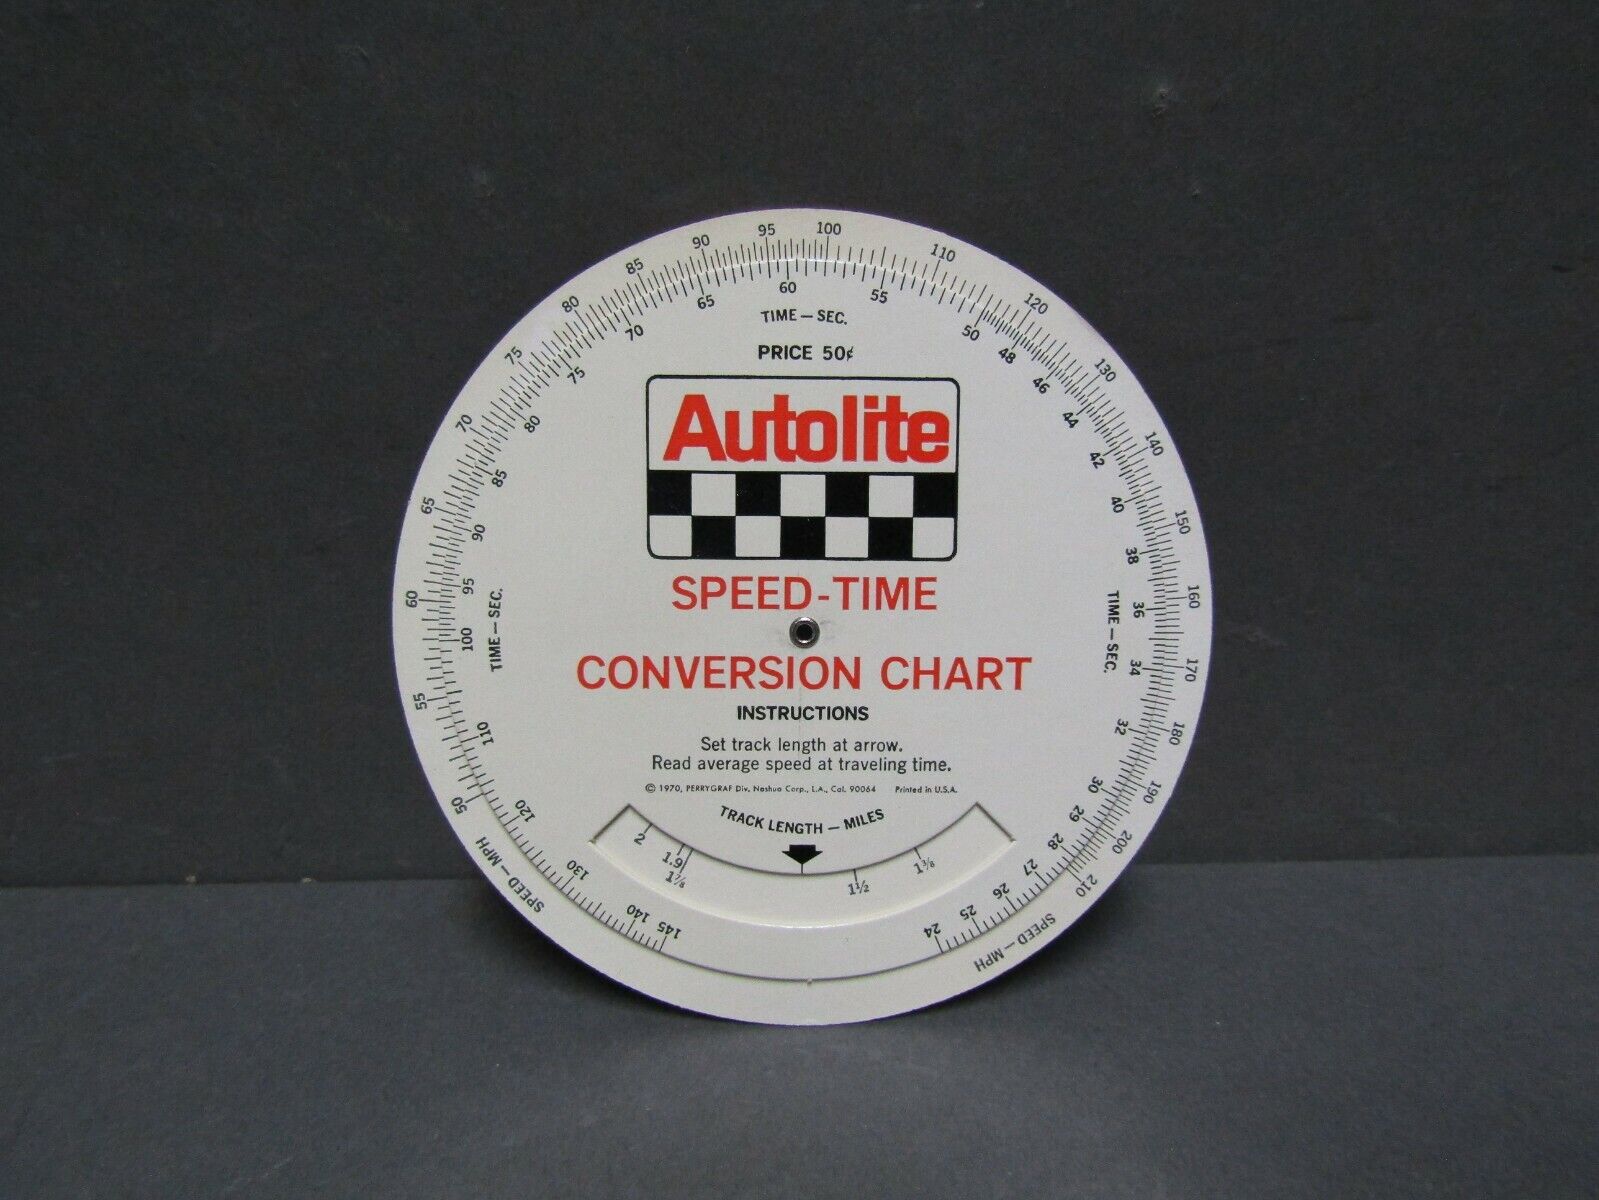 Autolite speed time conversion chart wheel Ford parts division